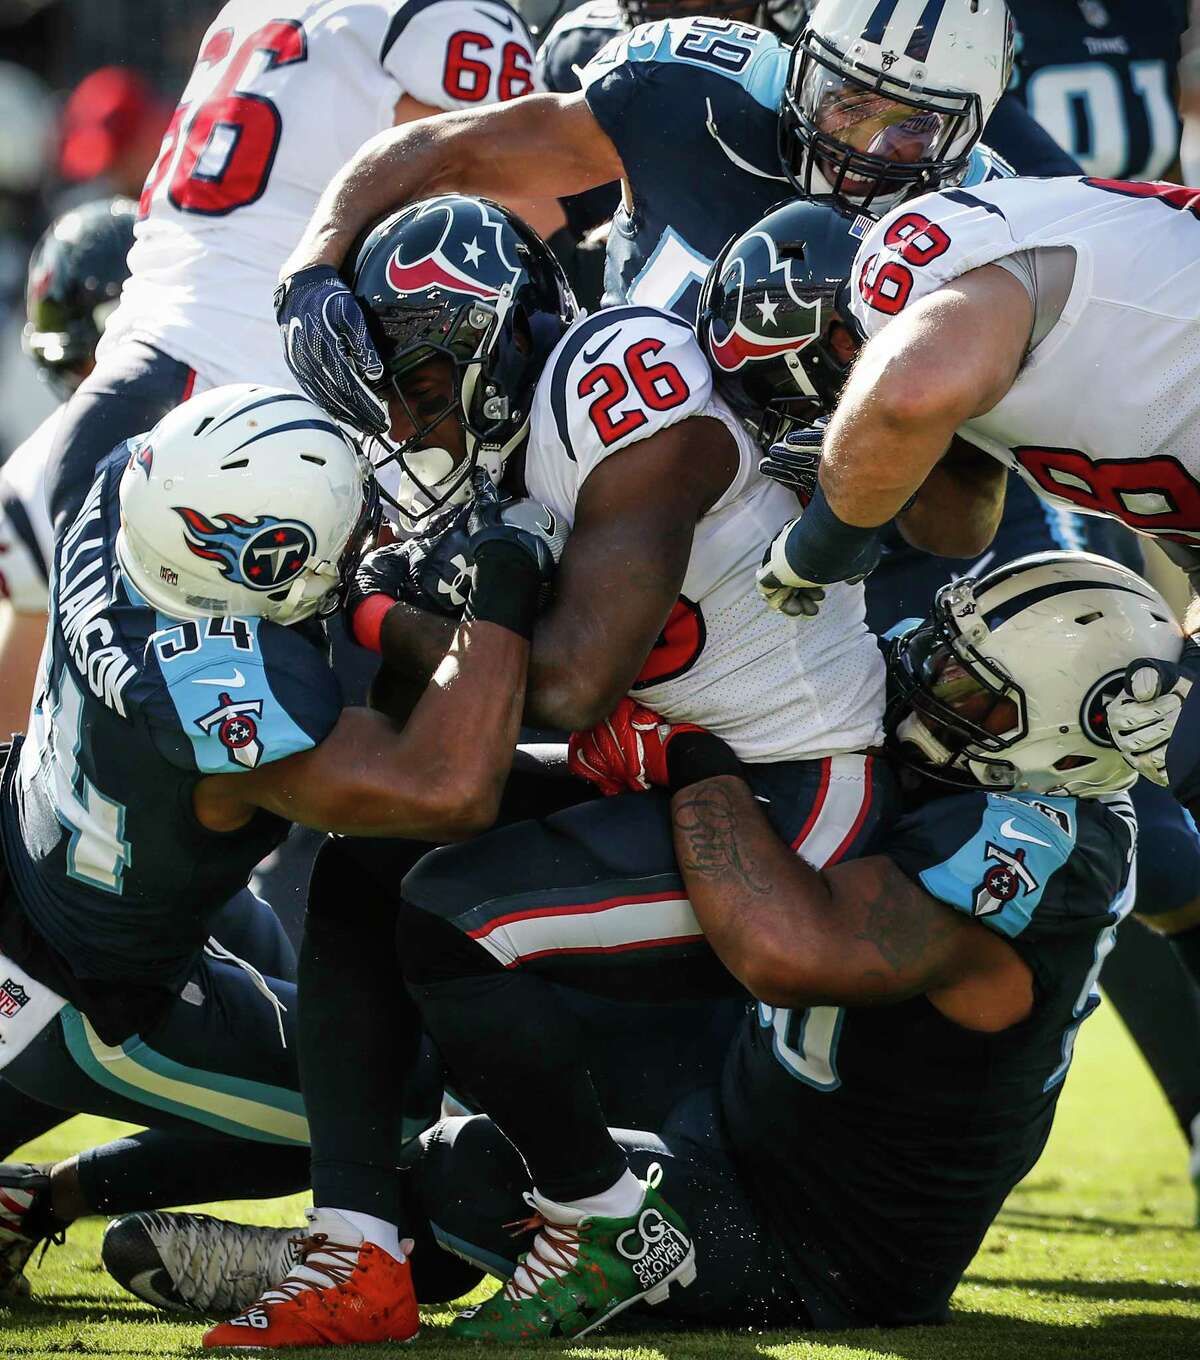 Houston Texans running back Lamar Miller (26) is stopped at the line of scrimmage by Tennessee Titans inside linebacker Avery Williamson (54) during the first quarter of an NFL football game at Nissan Stadium on Sunday, Dec. 3, 2017, in Nashville.